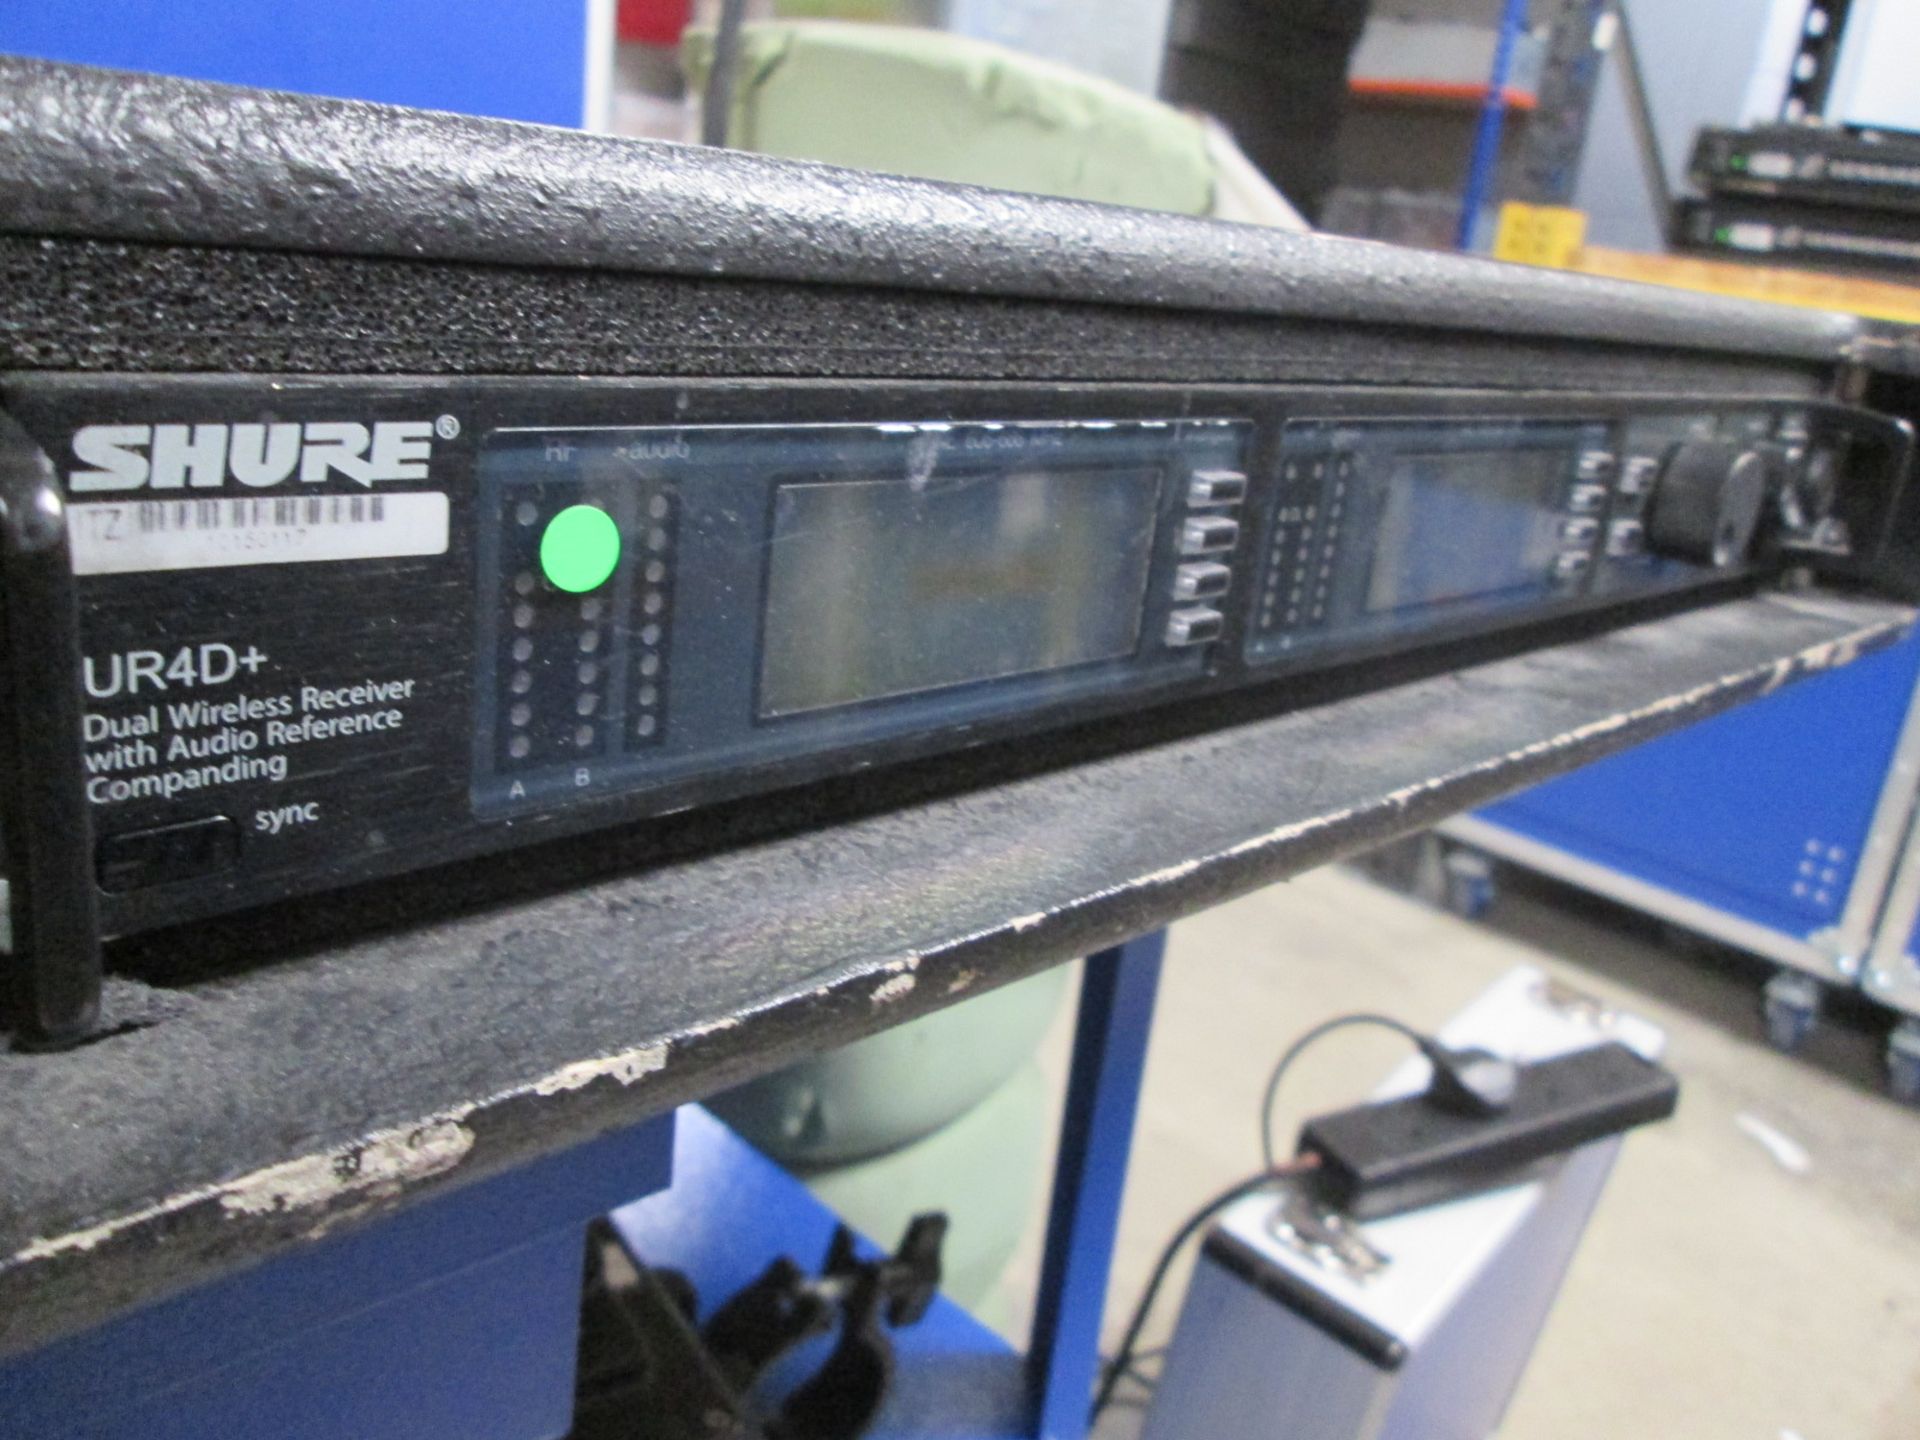 Shure UR4D+ Dual Wireless Receiver with Audio Reference Compounding K4E 606-666 MHz (Qty 2) Includes - Image 3 of 9